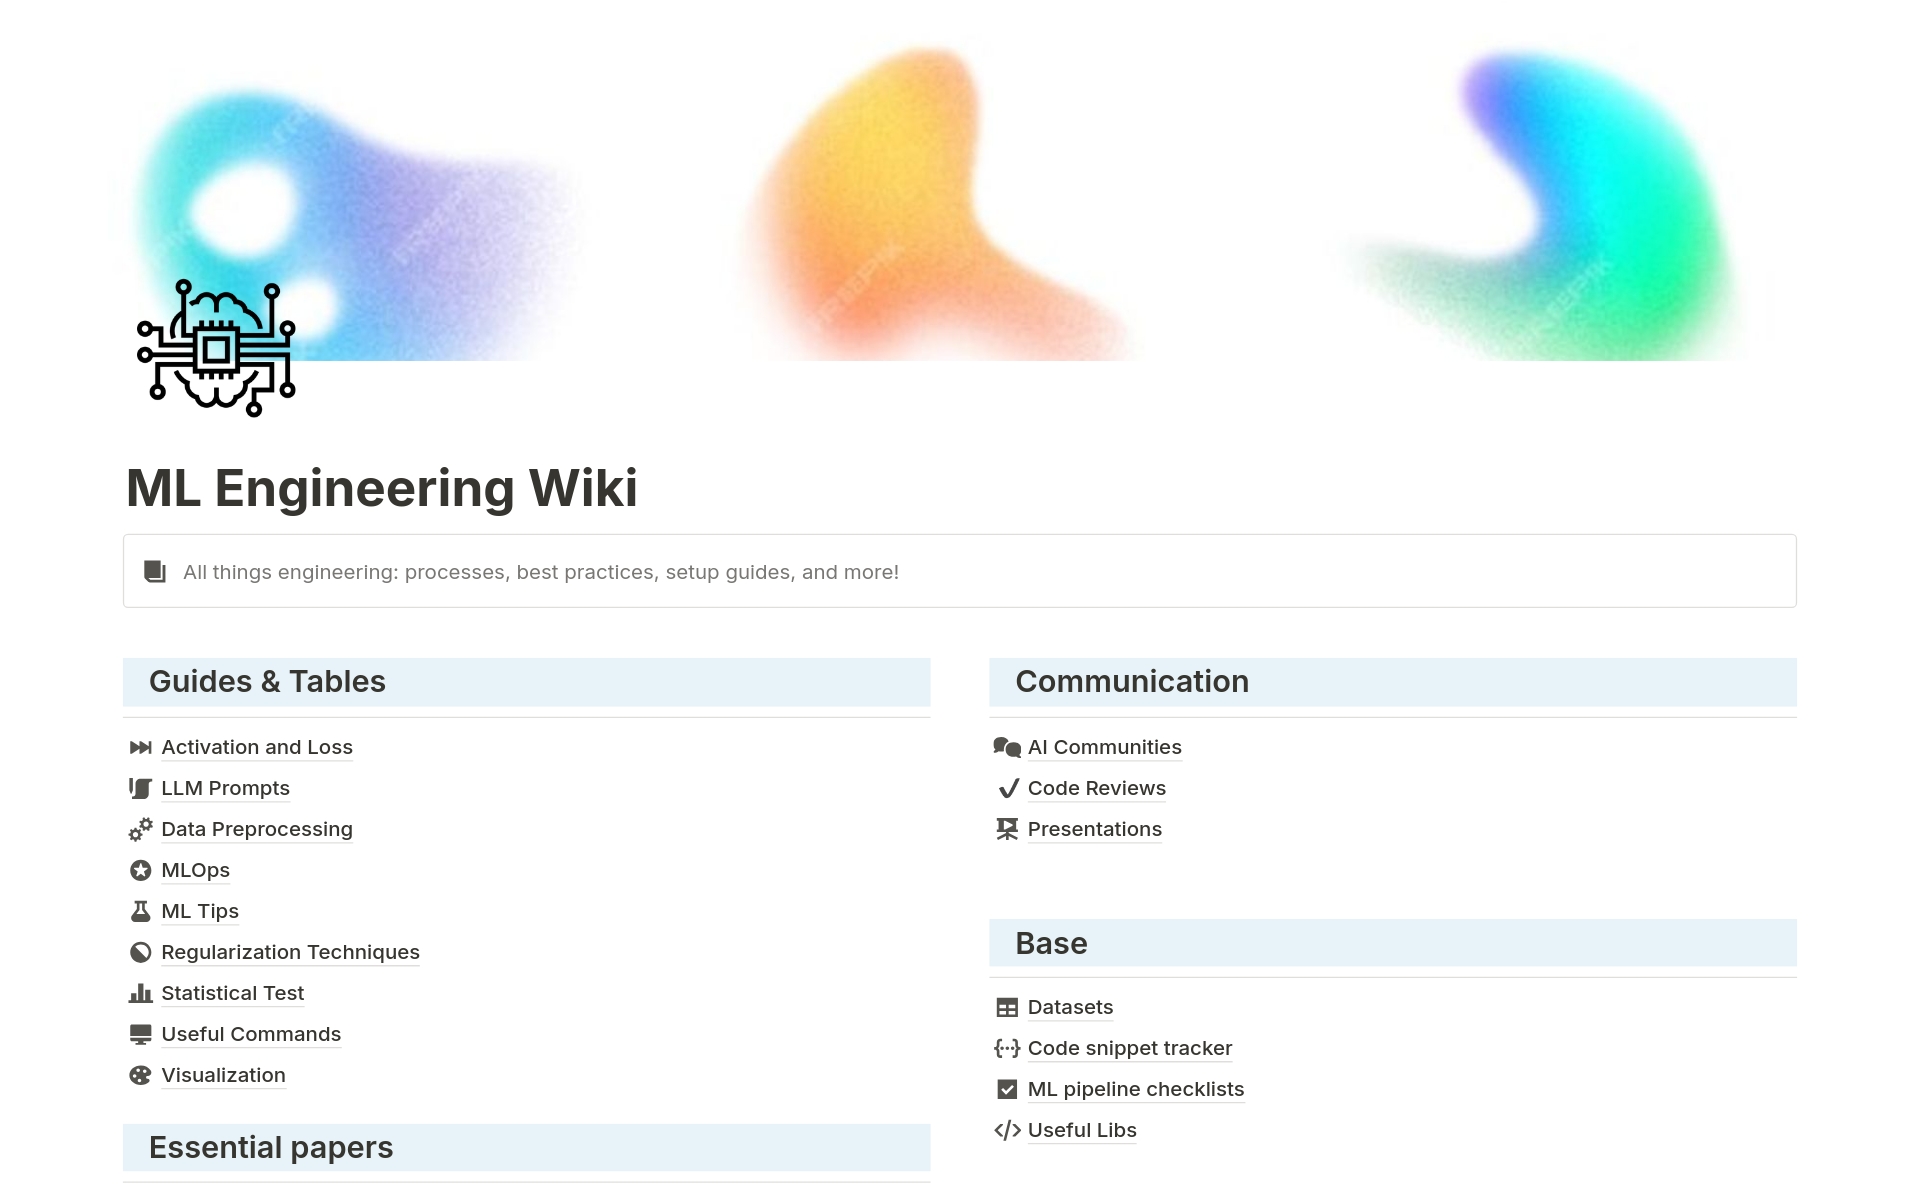 A comprehensive ML Engineering Wiki for Notion that includes checklists, curated resources, and best practices for accelerating machine learning project development.